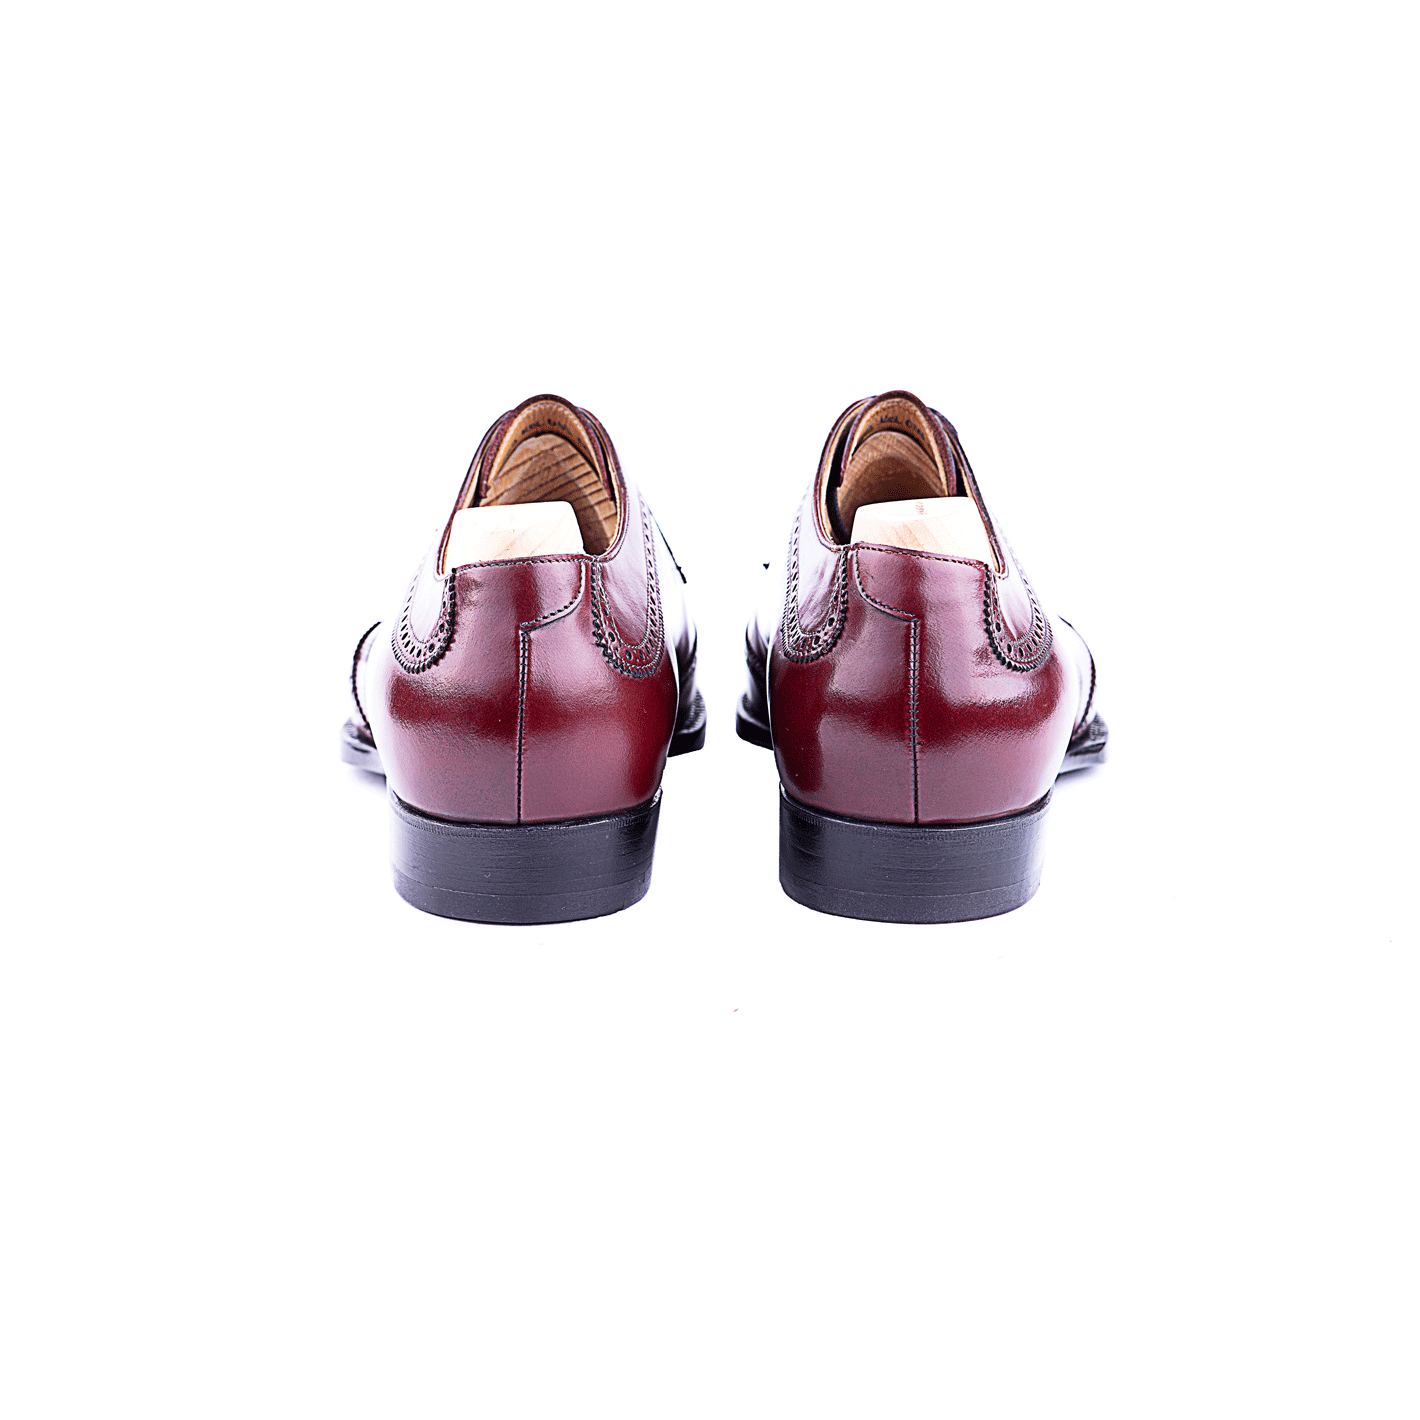 Long wing swan neck Derby with 3 eyelets in burgundy calf